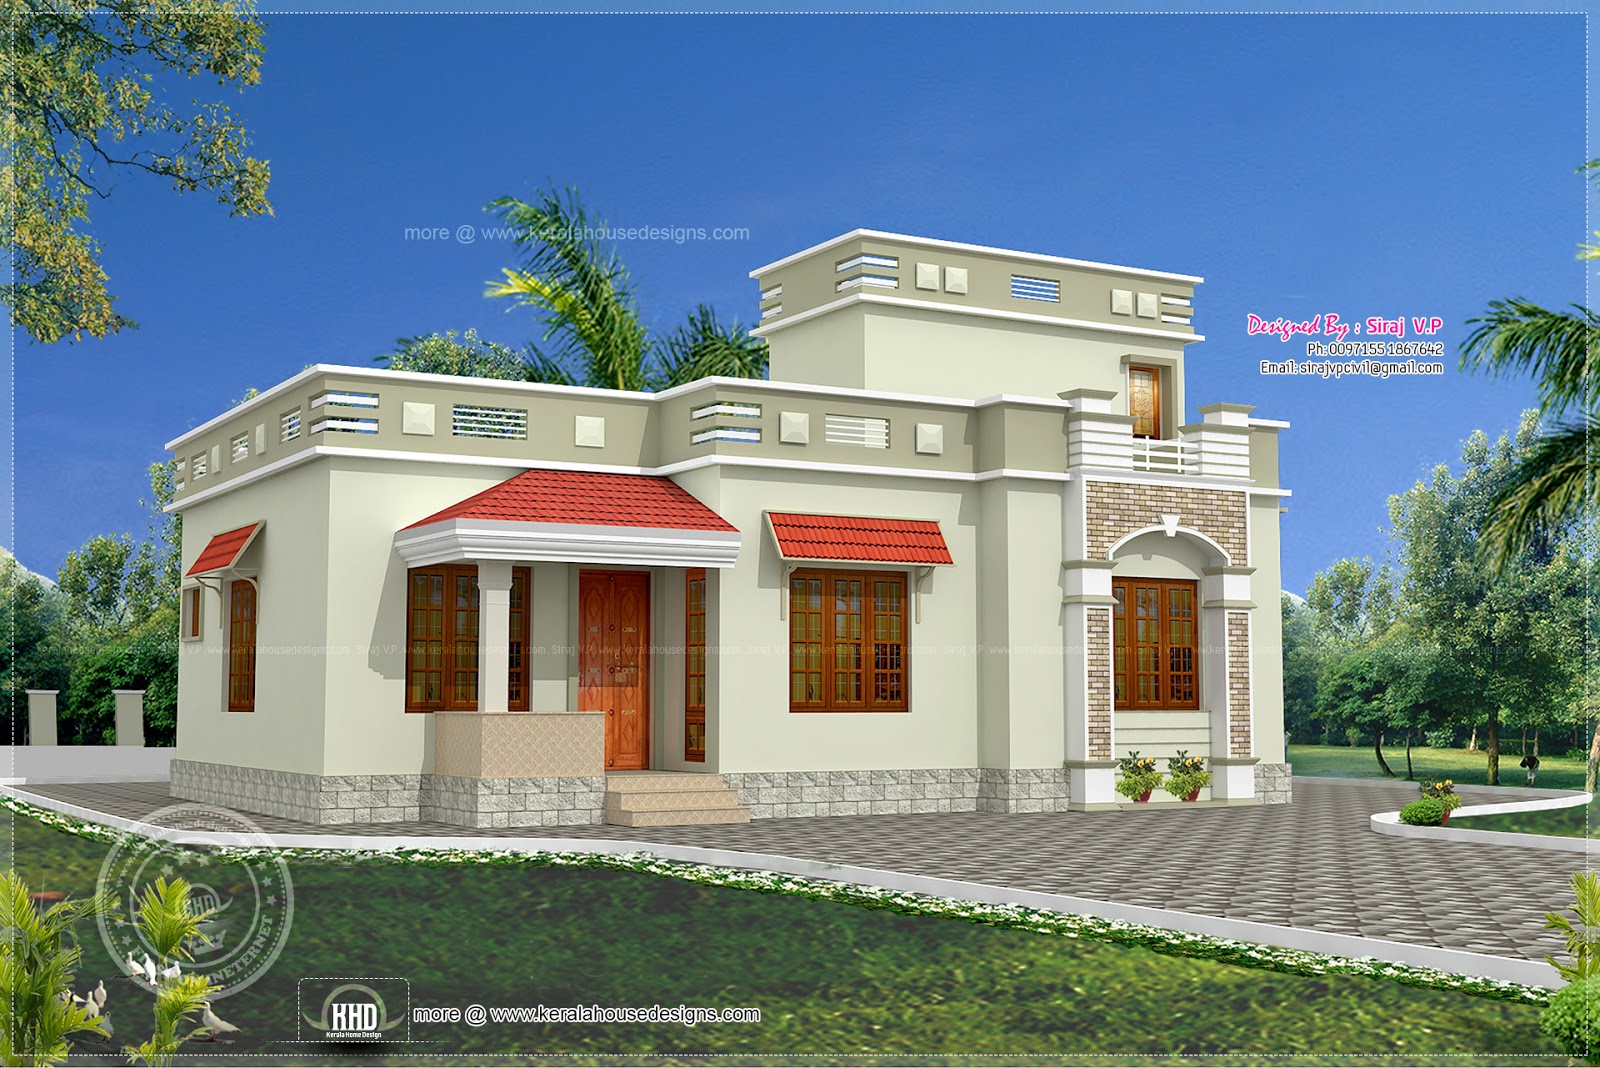 Low budget  Kerala  style home  in 1075 sq feet House  